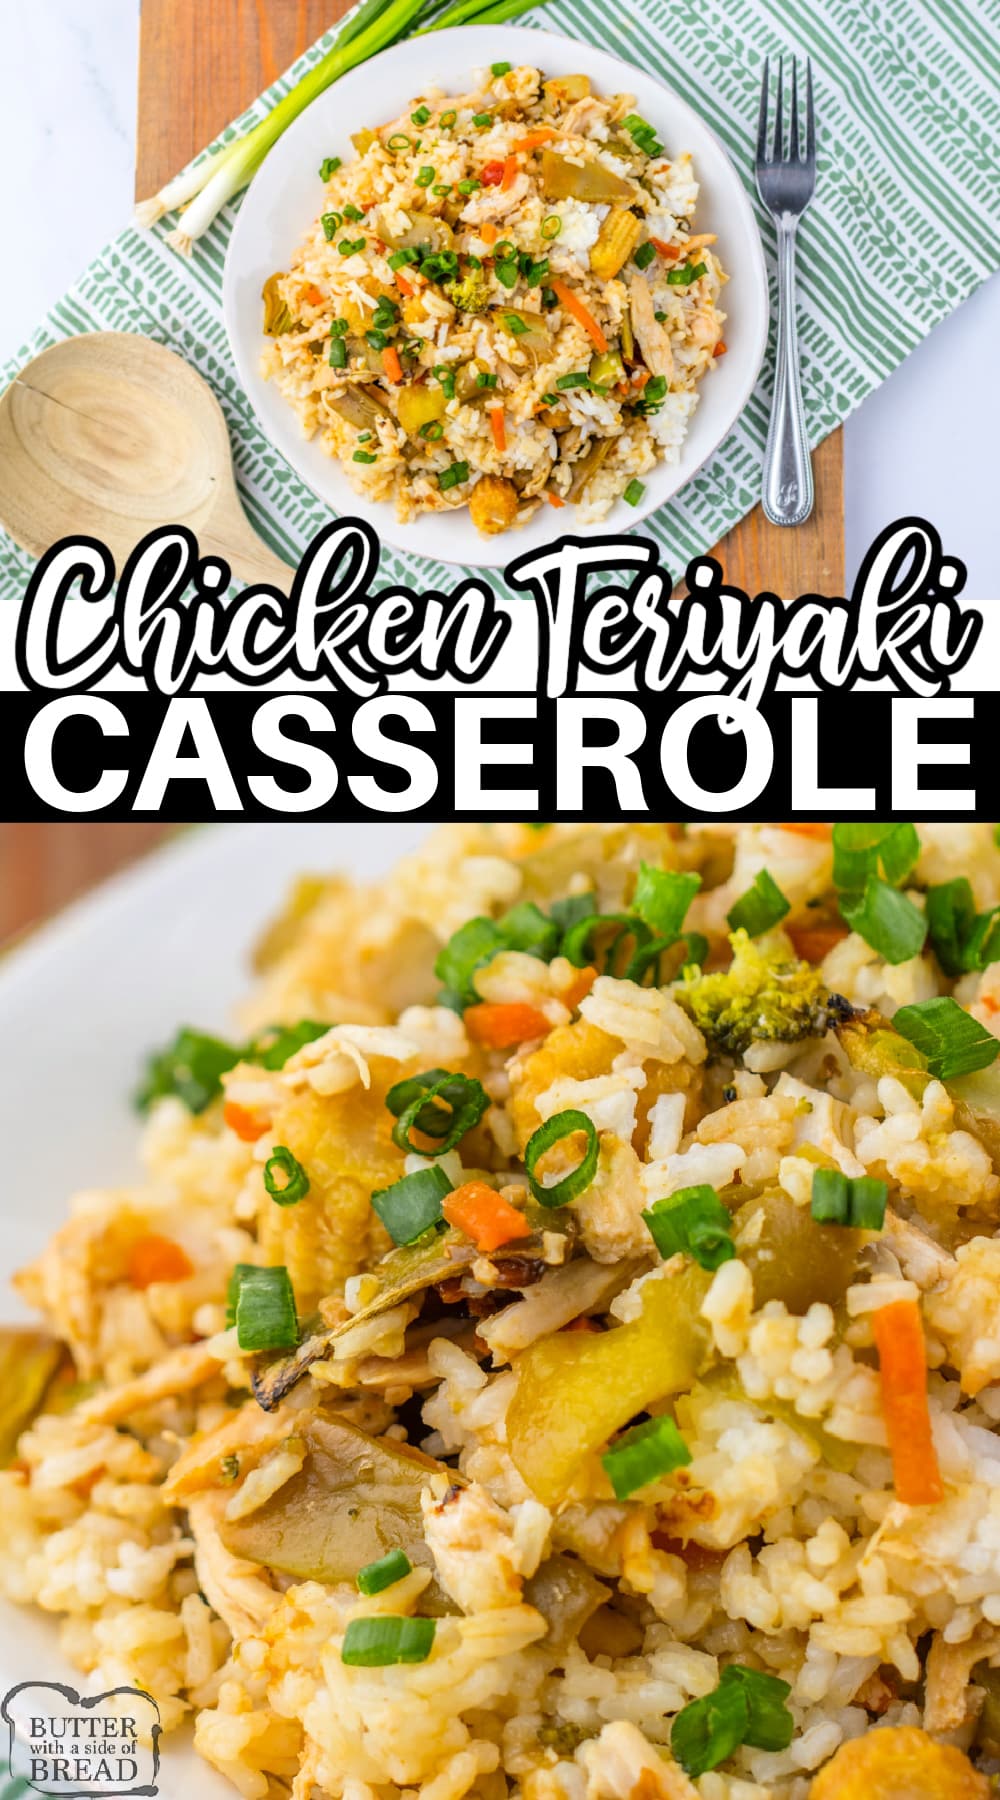 Chicken Teriyaki Casserole is an easy and delicious weeknight dinner recipe. This simple casserole recipe is made with rice, chicken, vegetables, and a homemade teriyaki sauce. 